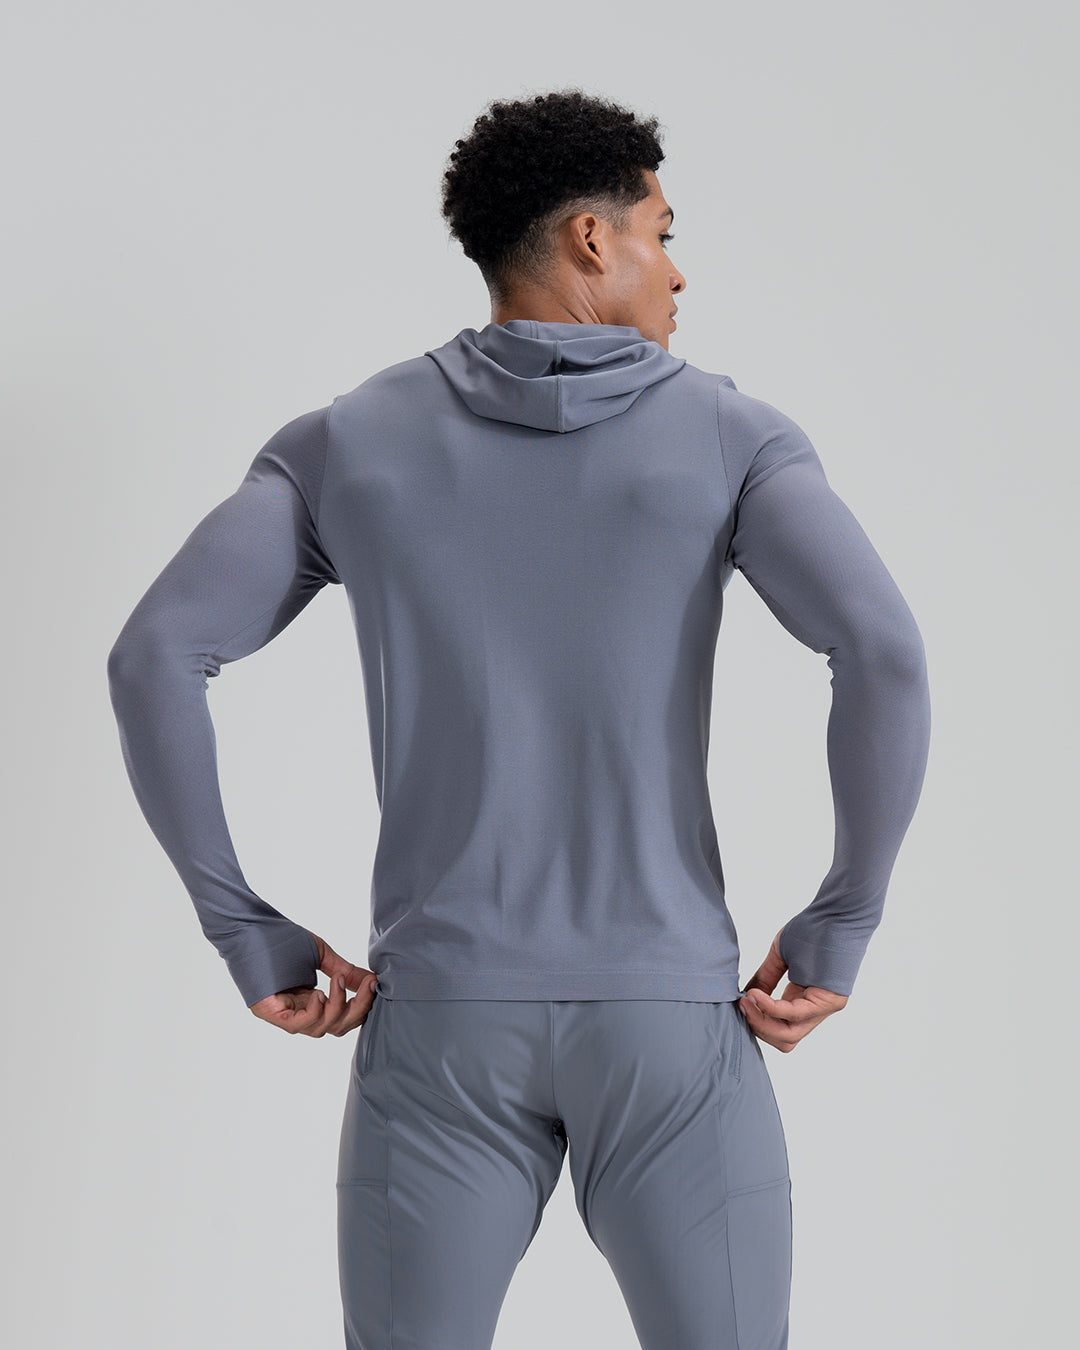 FlowState Hooded Long Sleeve Training Top